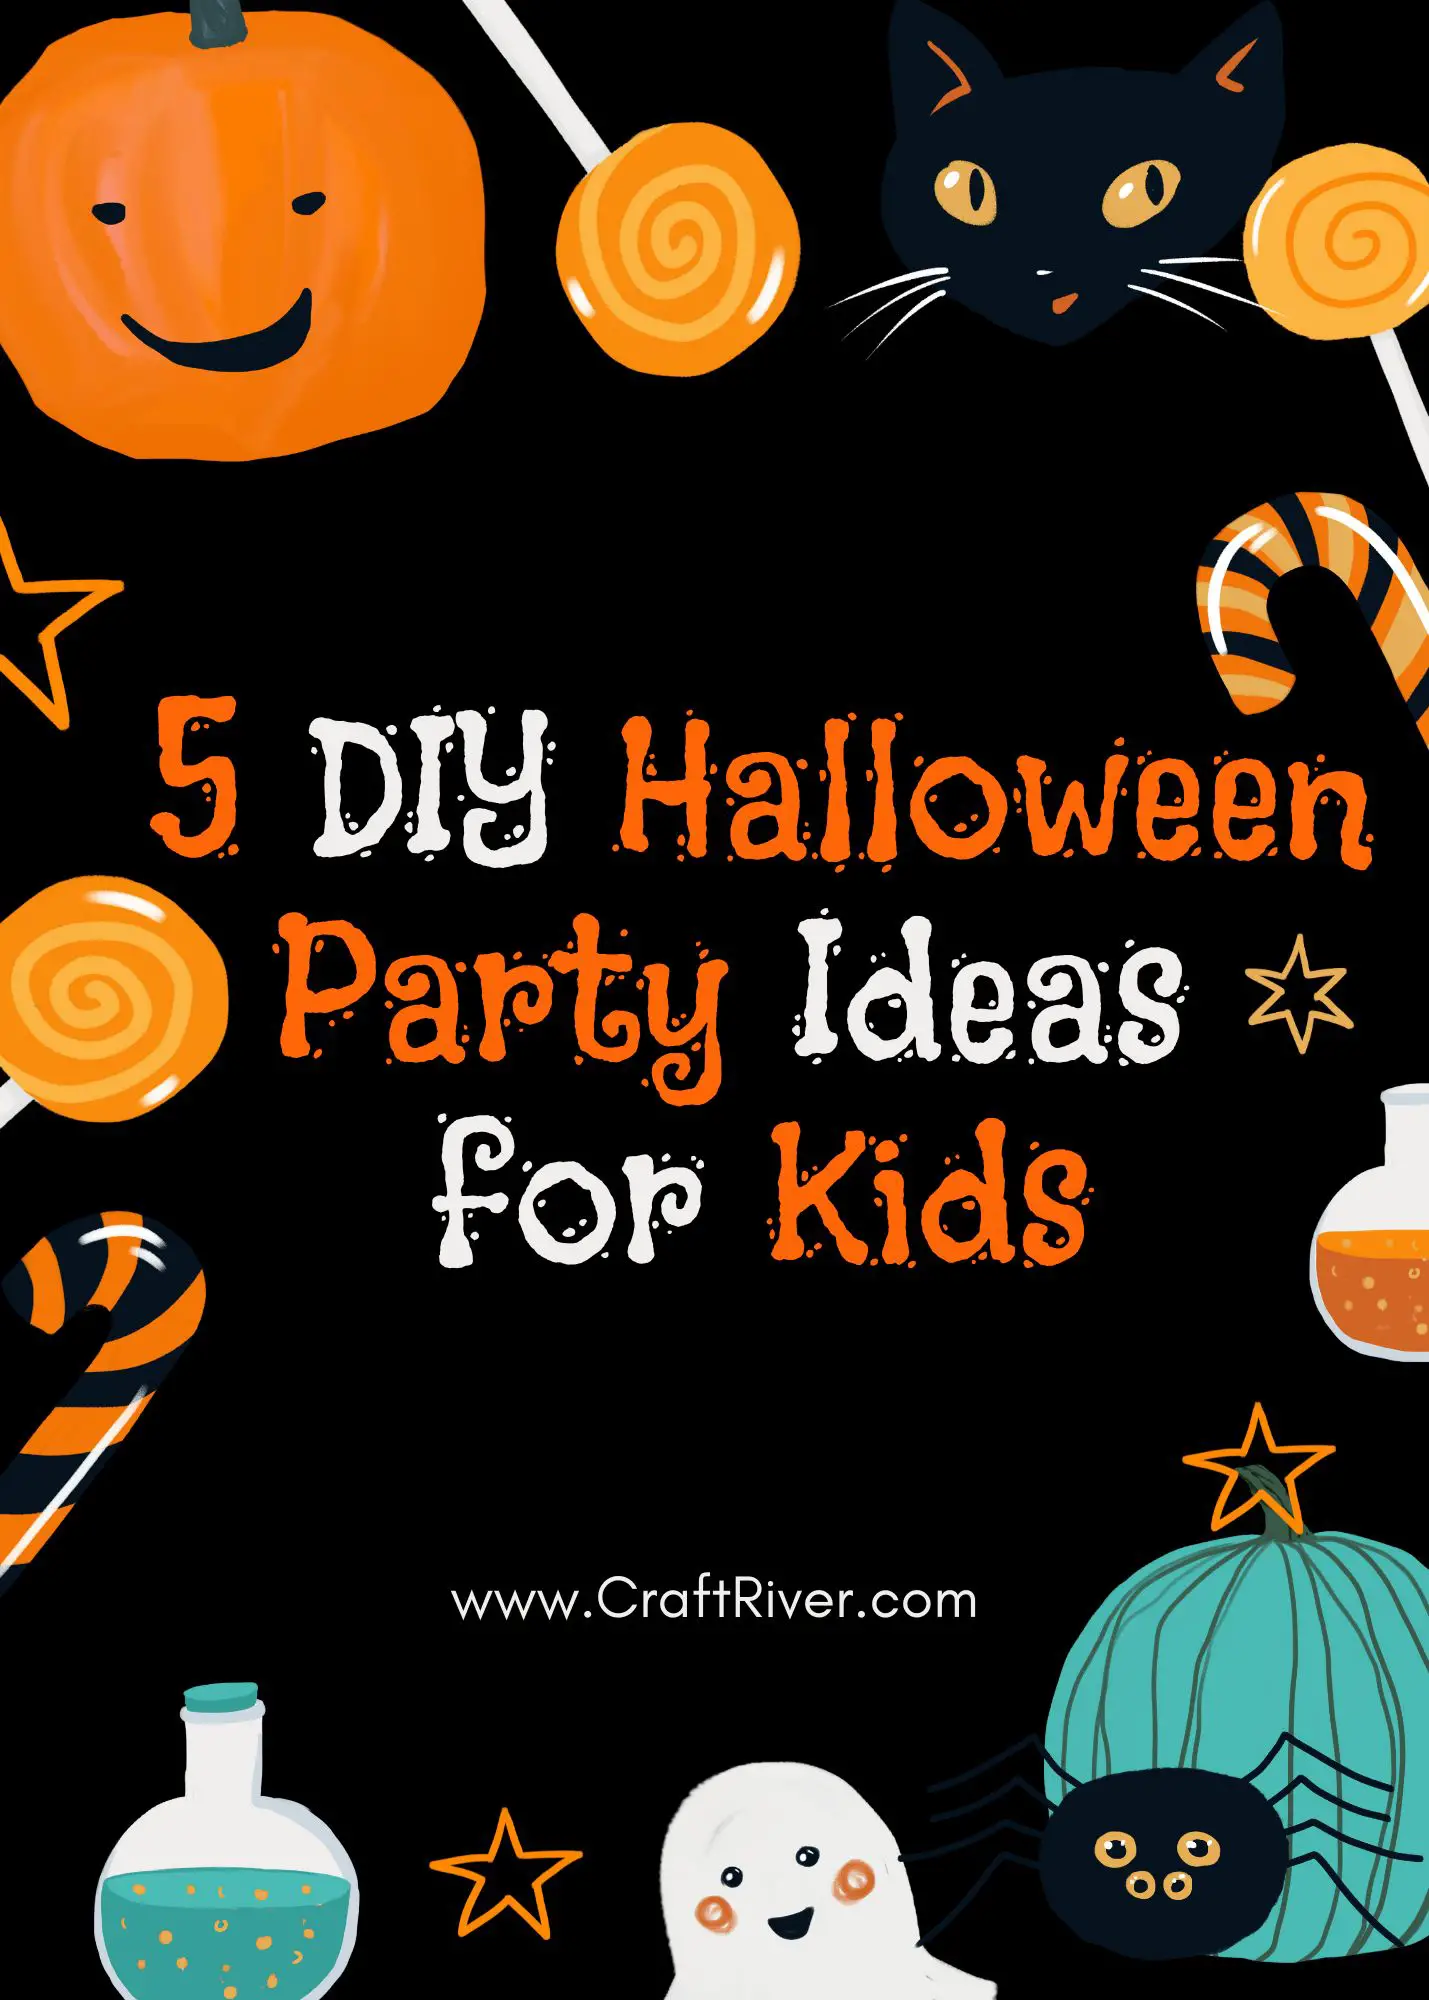 DIY Halloween Party Ideas for Kids